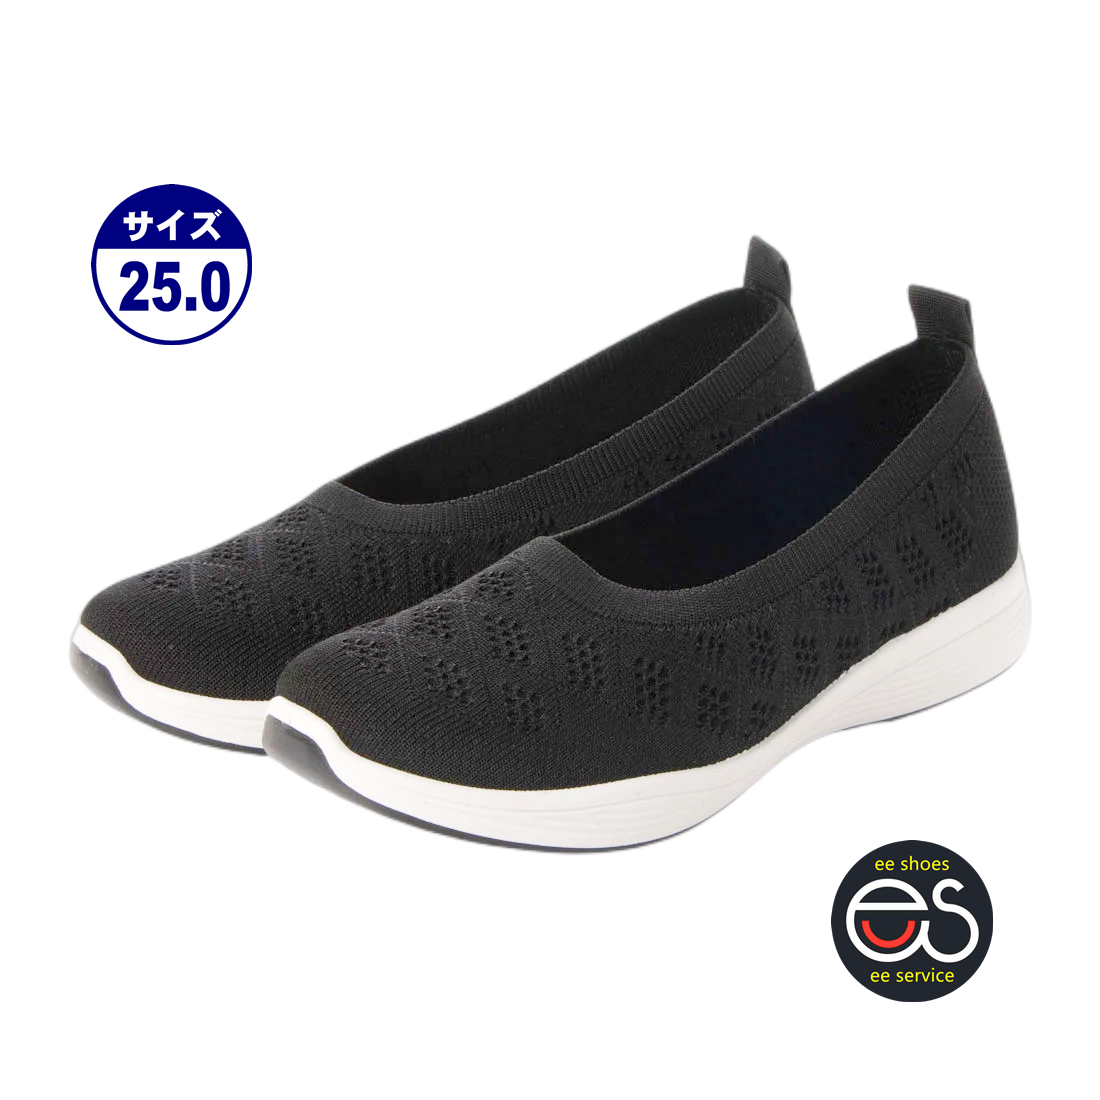 * new goods * popular *[22538-BLACK-25.0] lady's pumps flat shoes fly knitted Fit feeling eminent! light weight & ventilation &. bending .!